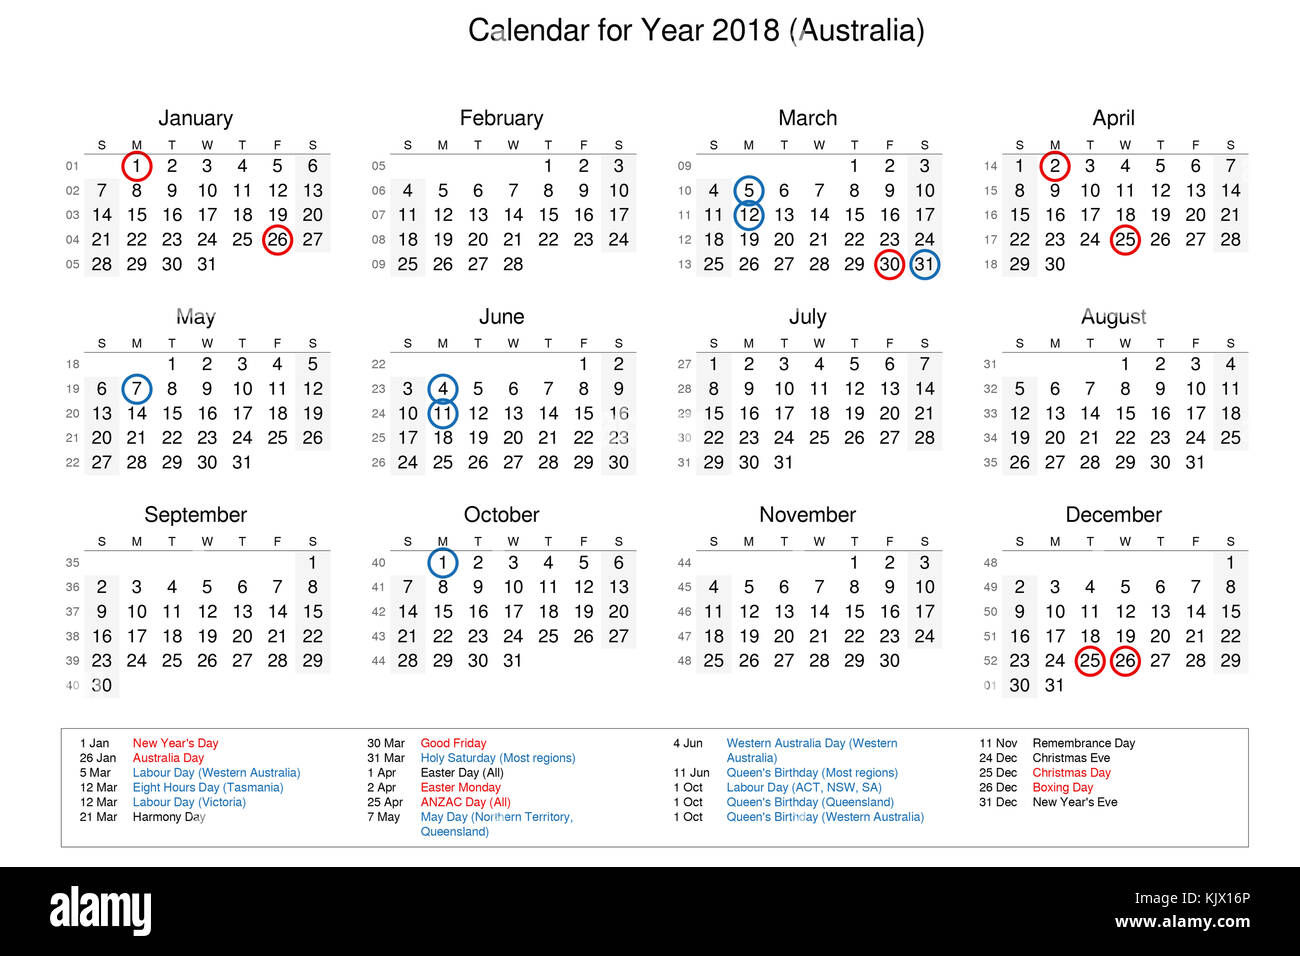 Calendar of 2018 with public holidays and for Australia Stock Photo - Alamy